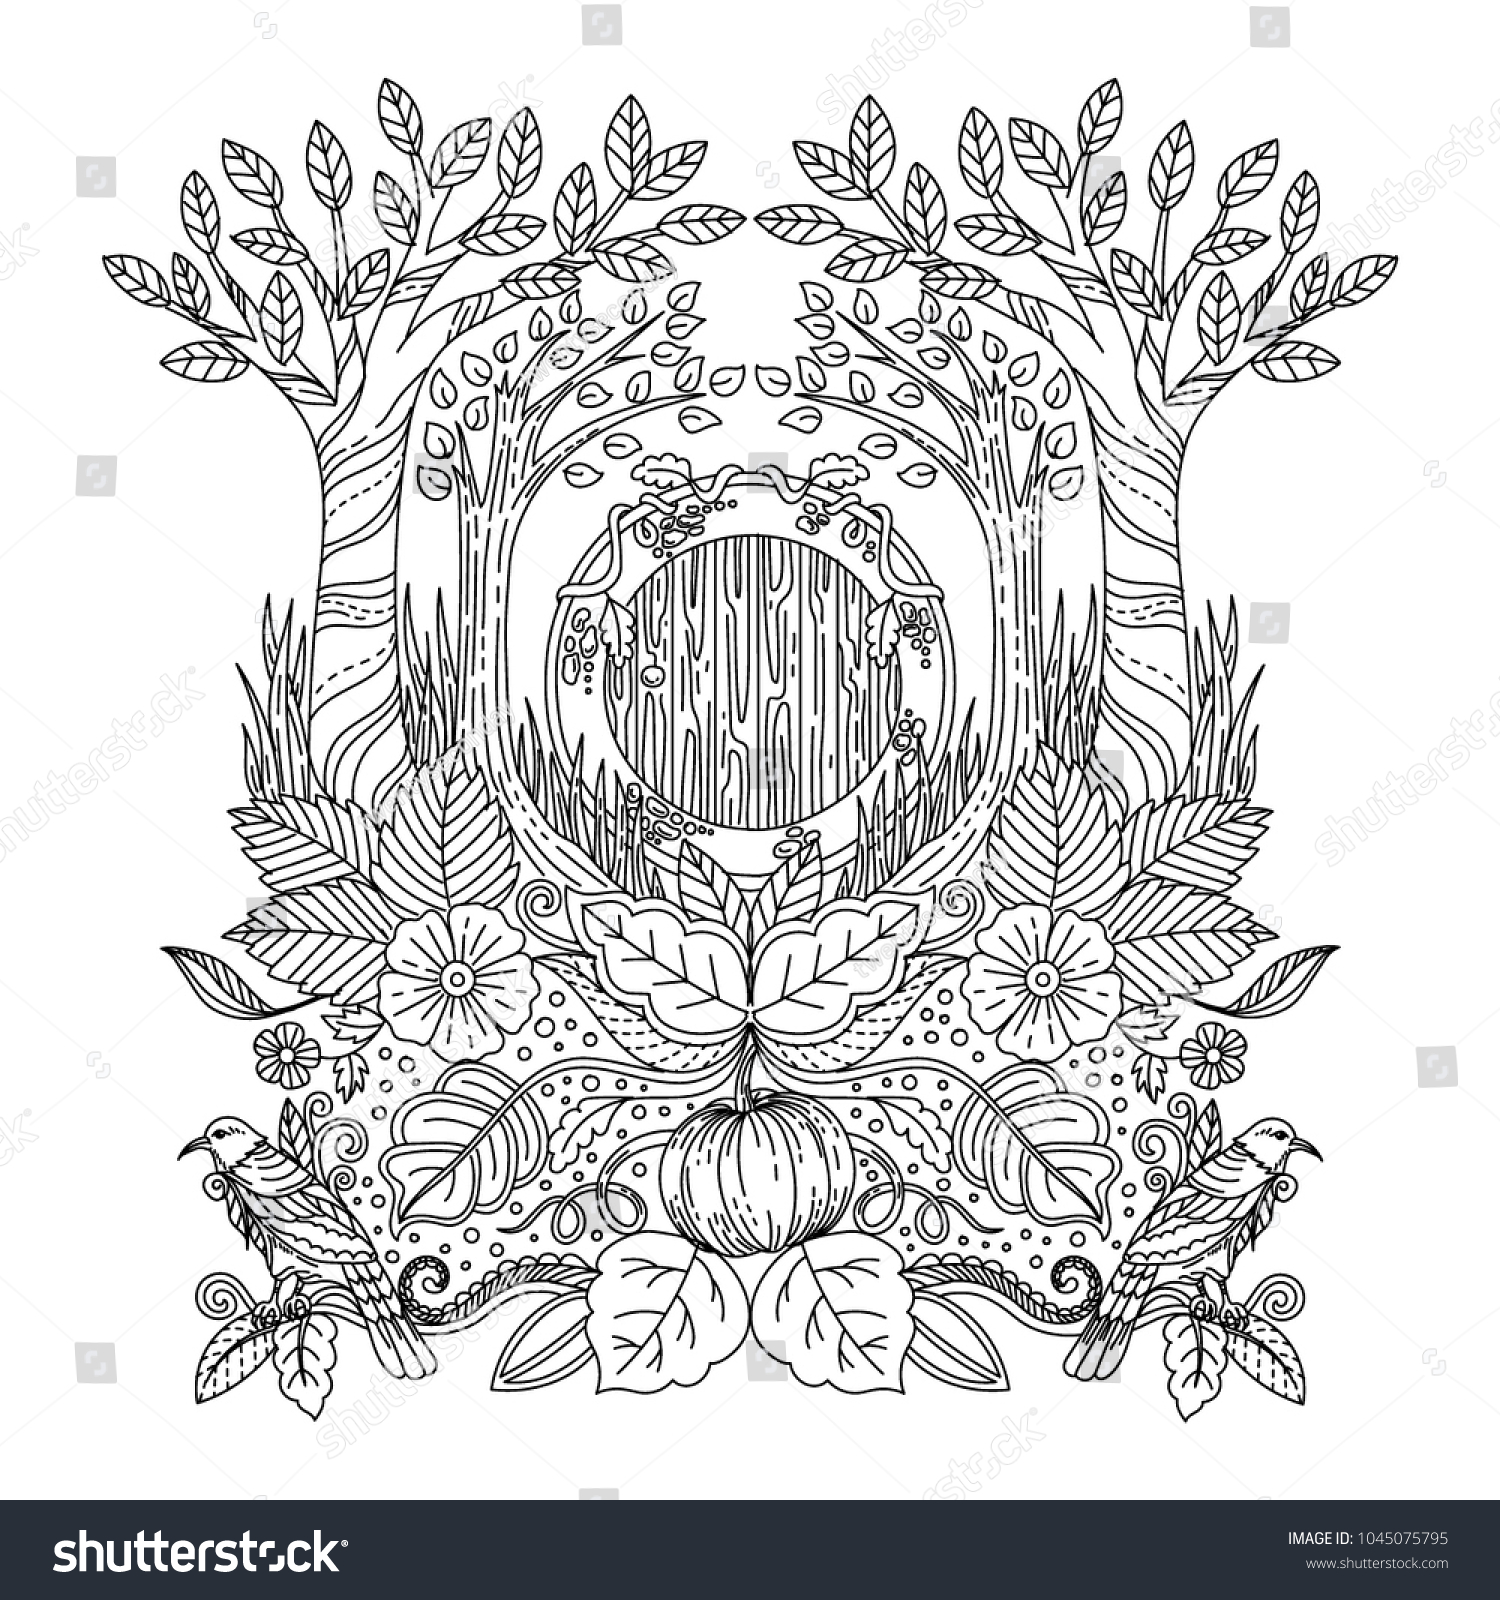 SVG of Included in this pack is adult color illustration of hobitton house at the forest. svg